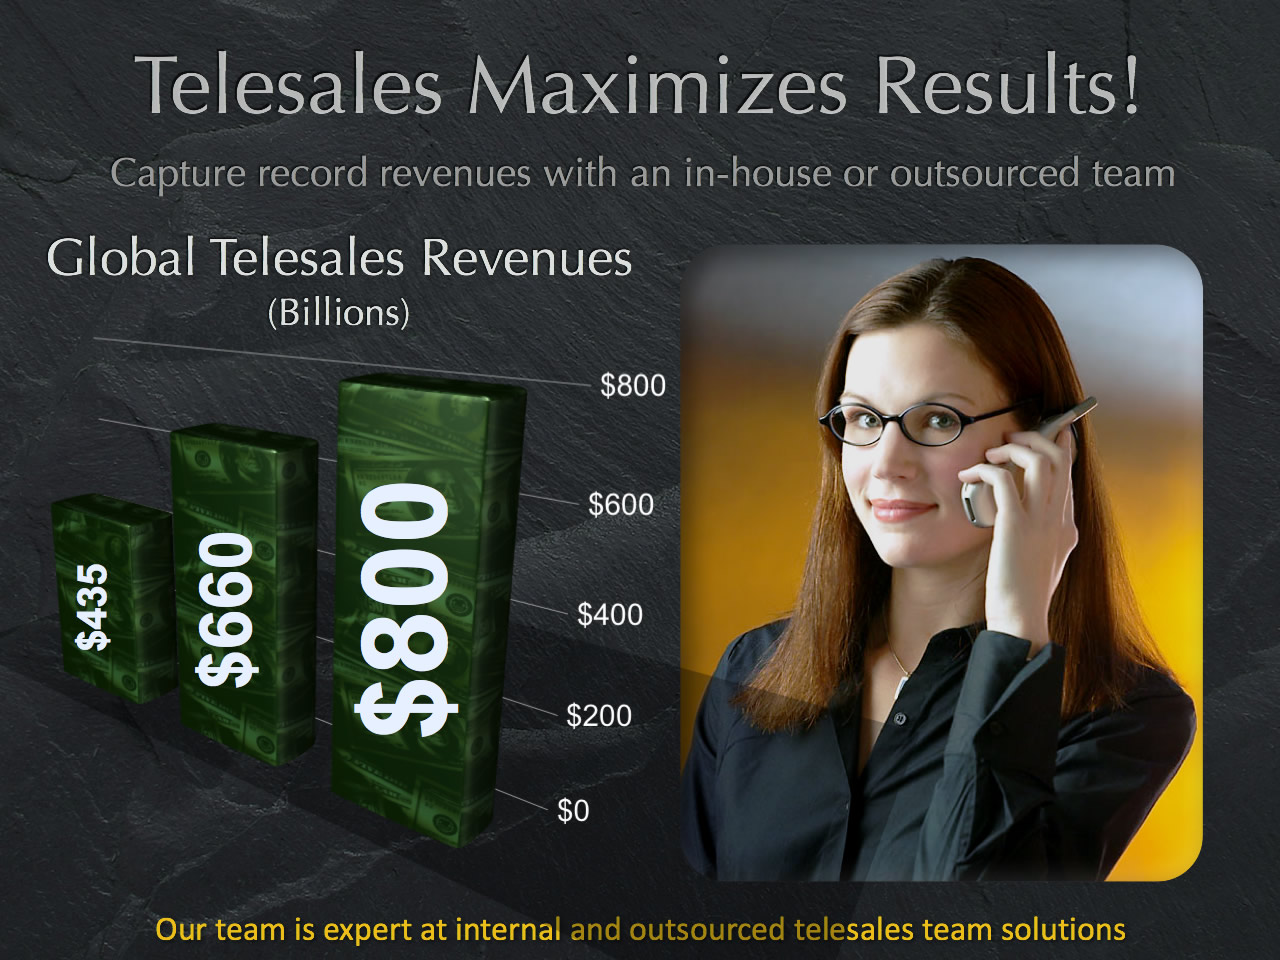 Telemarketing or telesales can be a local selling force with up to global reach